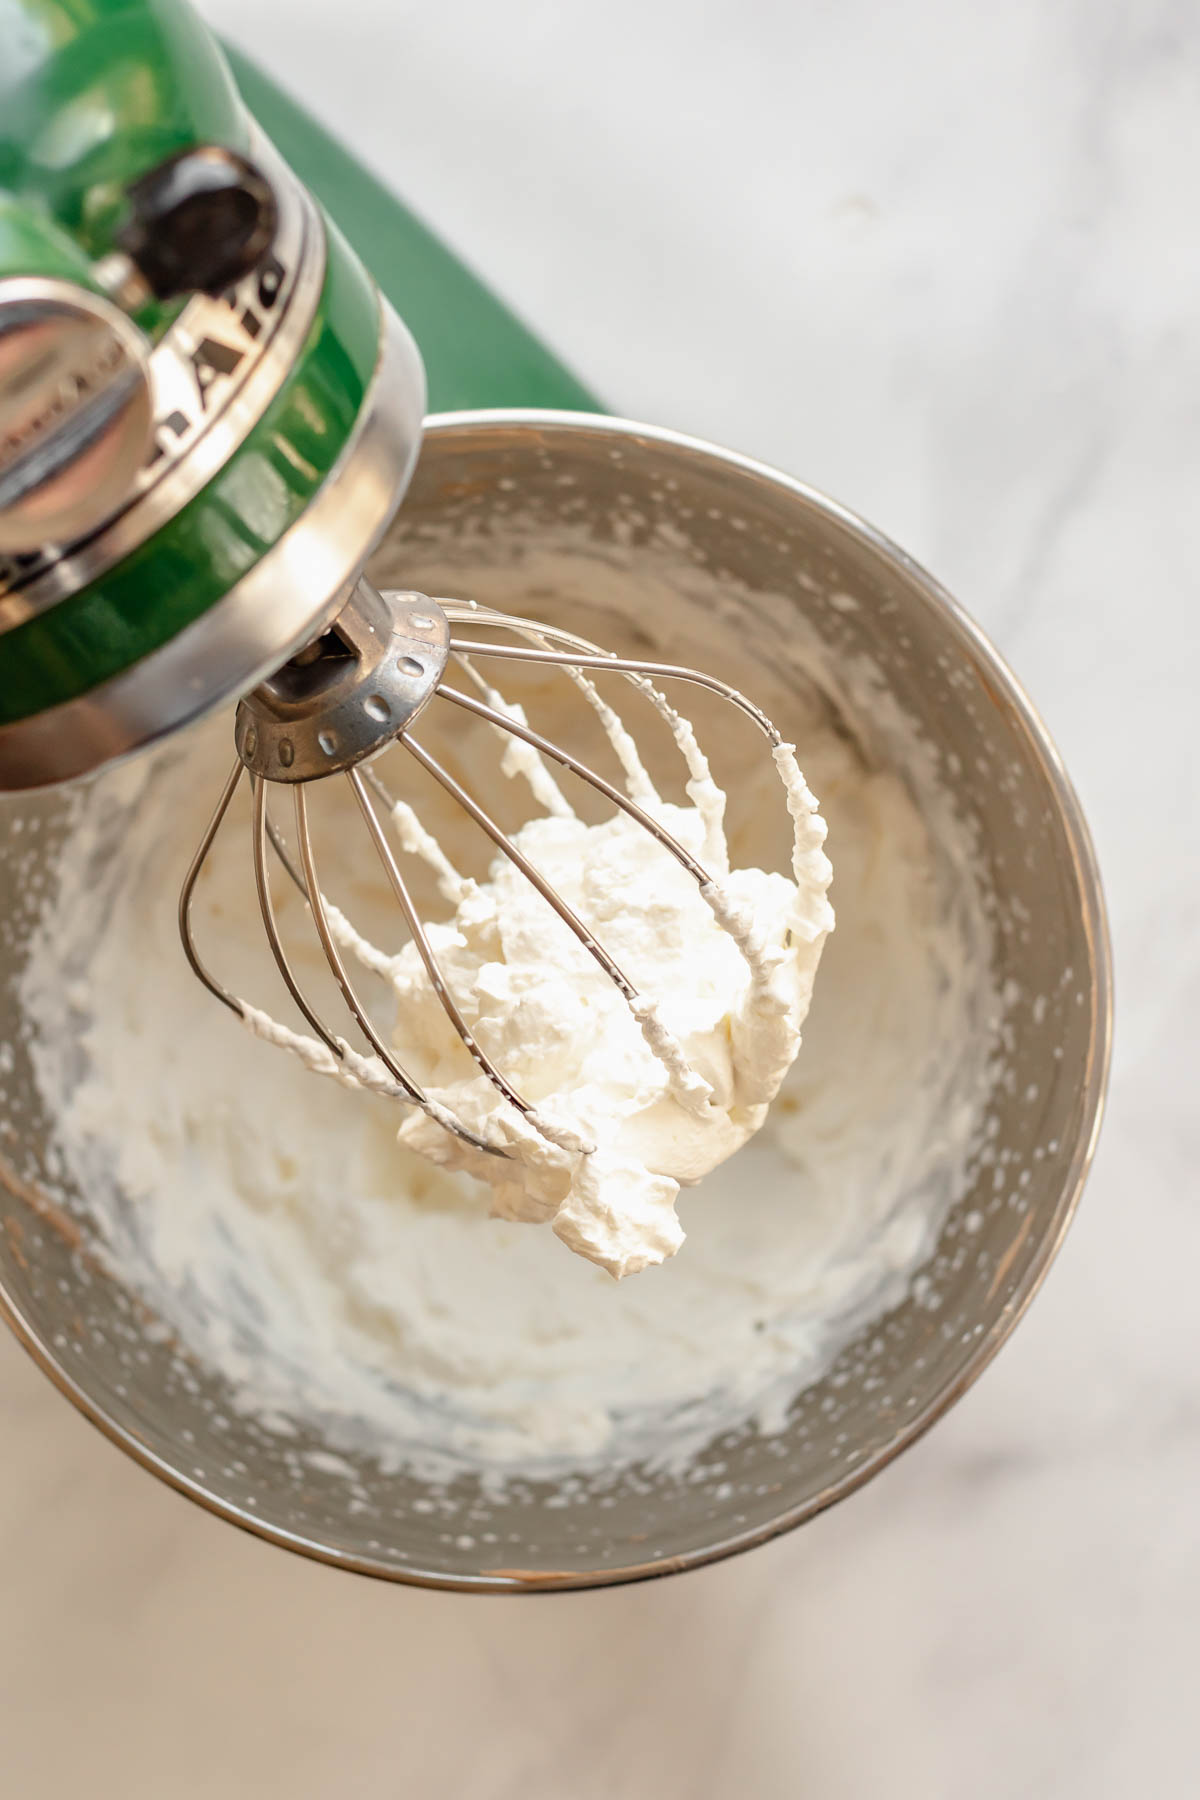 Whipped cream in the whisk of a stand mixer.